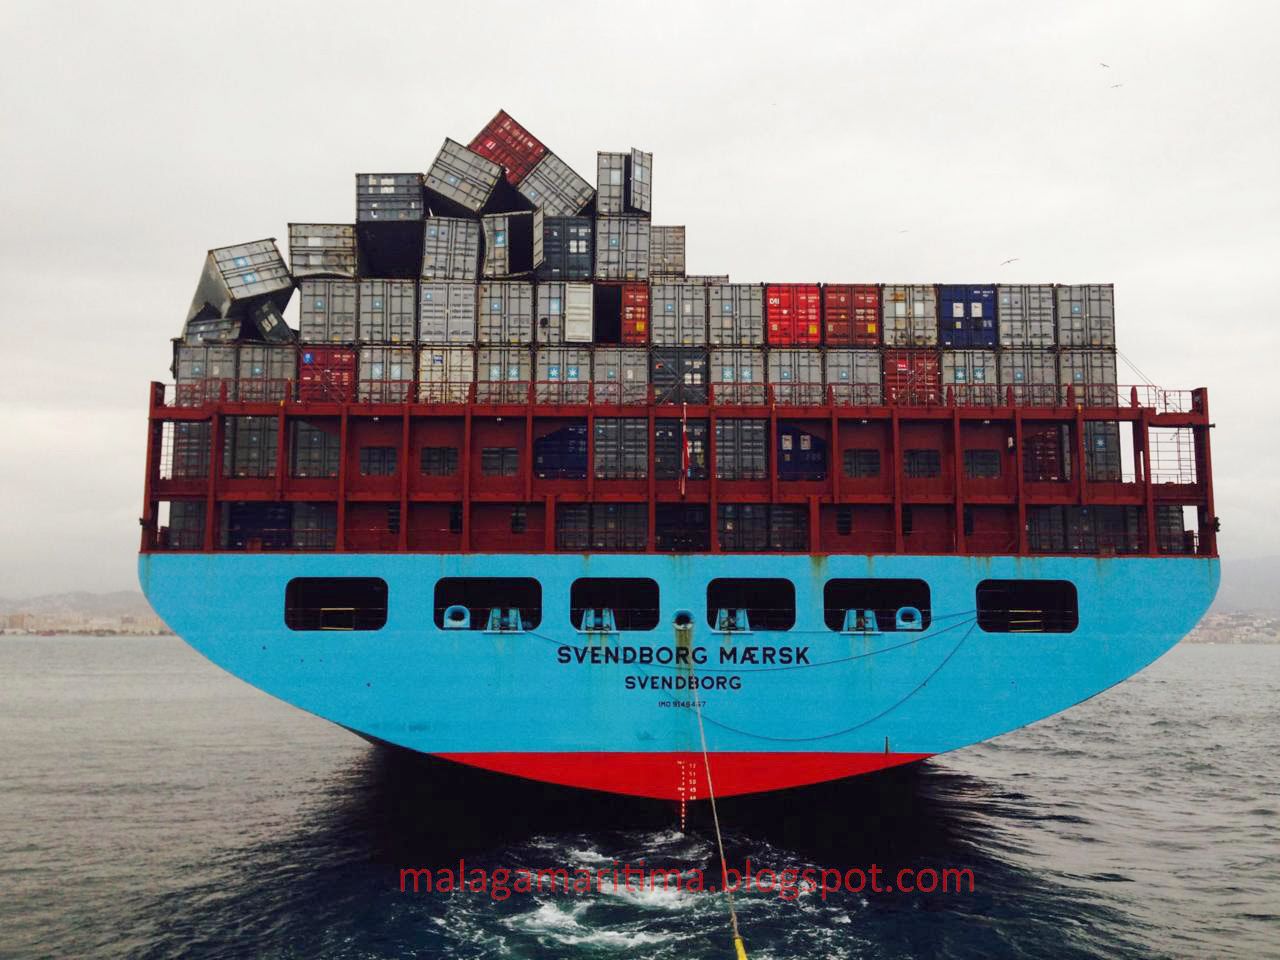 The Svendborg Maersk was struck by high wind and waves off the coast of France after it left the Bay of Biscay By the time it had reached the Spanish port of Malaga, more than 500 containers were unaccounted for. 